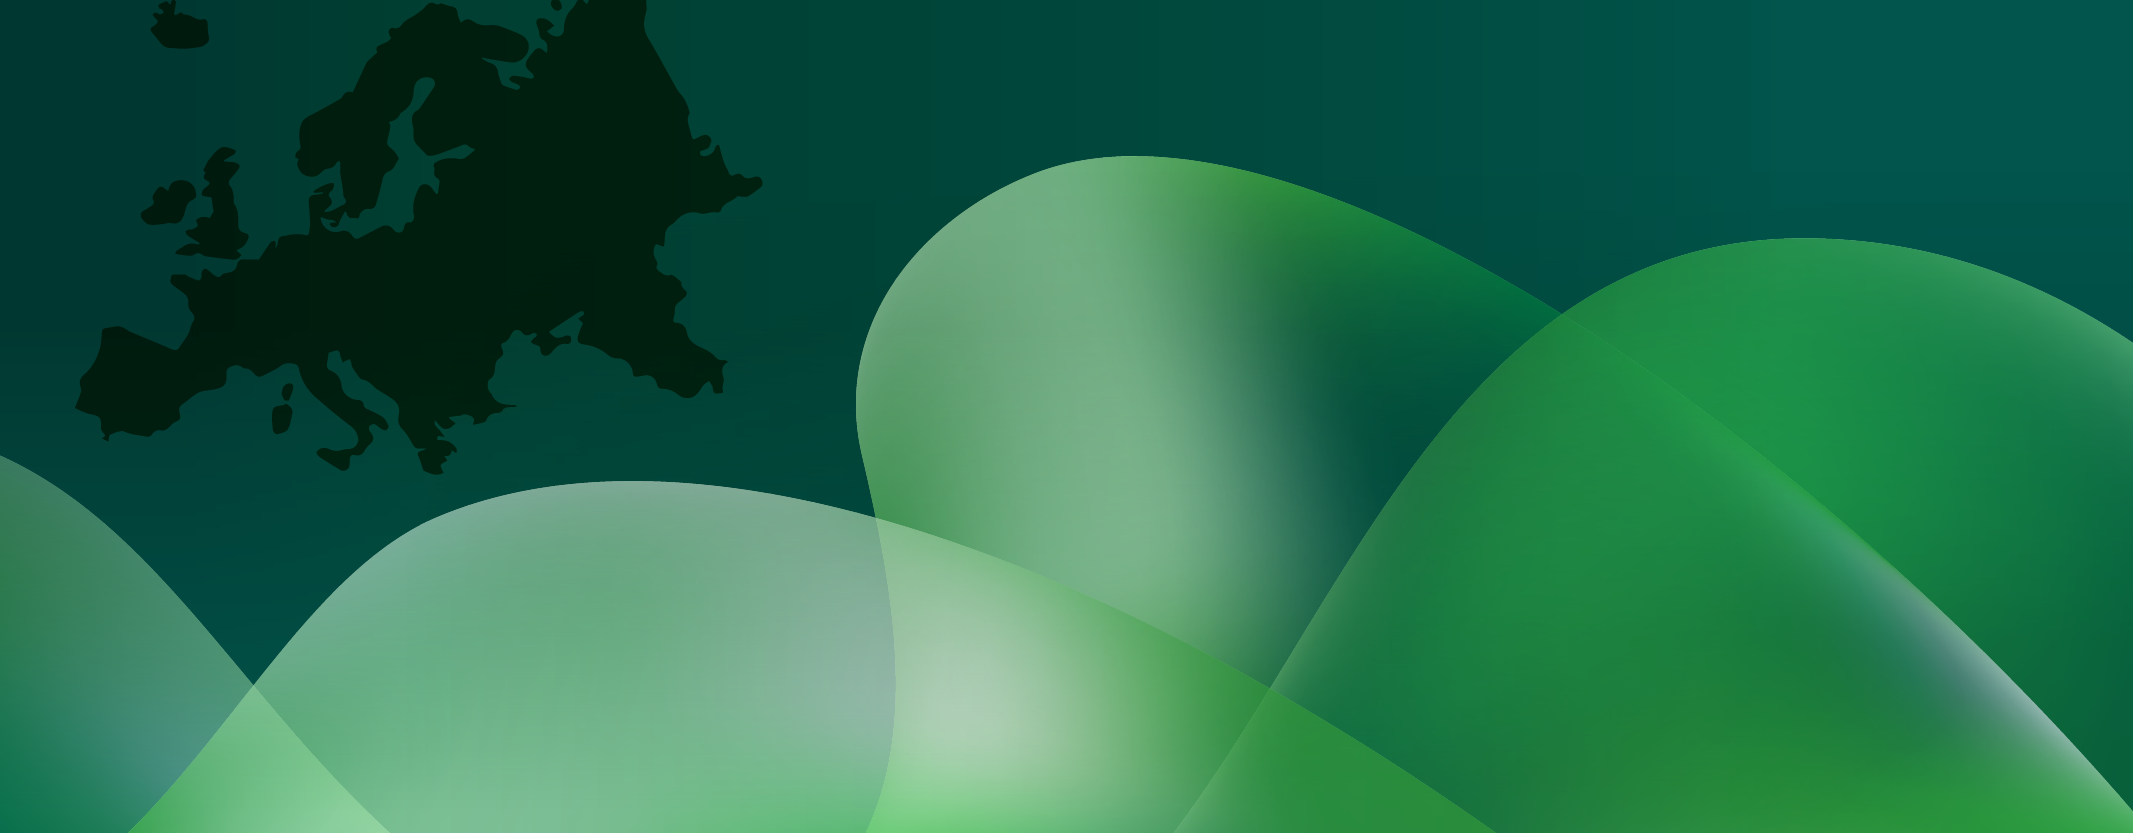 Europe continent silhouette with light green gradient waves against dark green background.